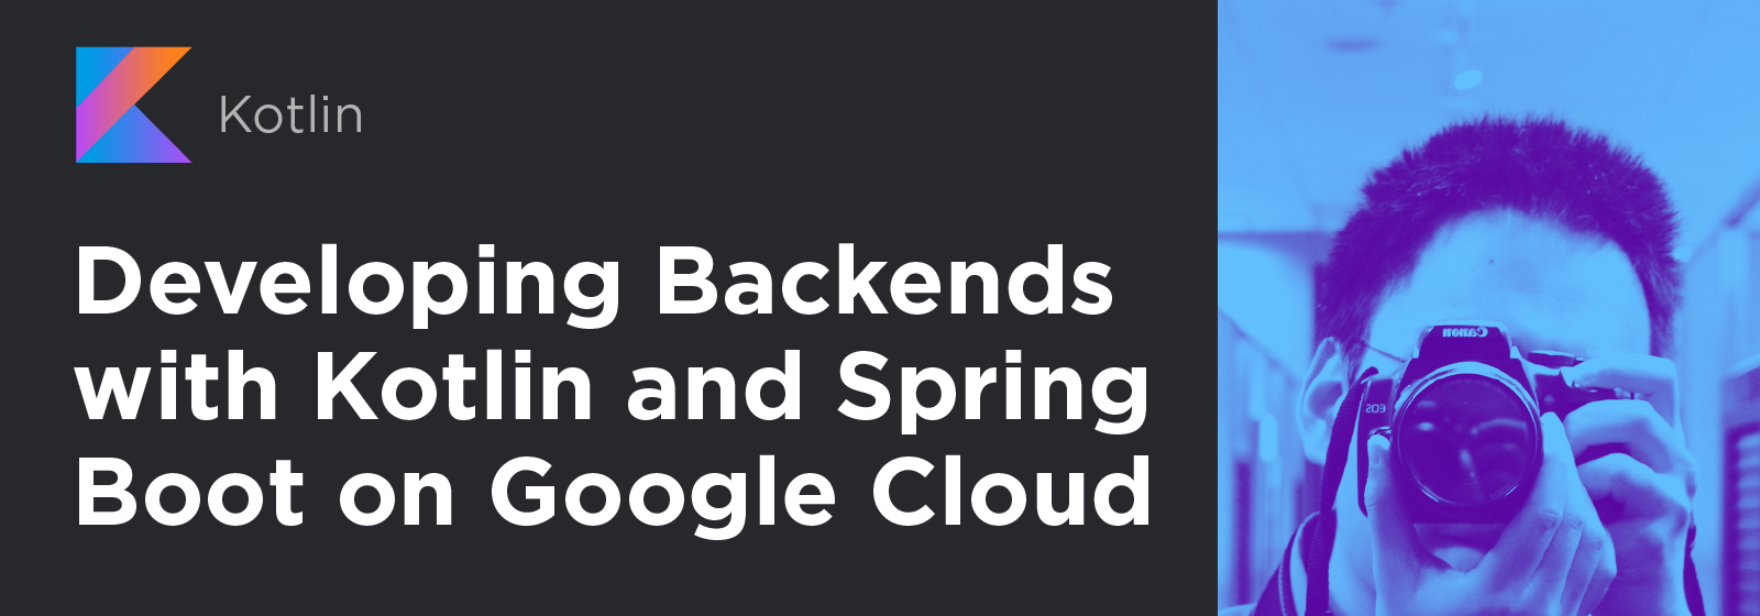 Обложка курса Вебинар Developing Backends with Kotlin and Spring Boot on Google Cloud